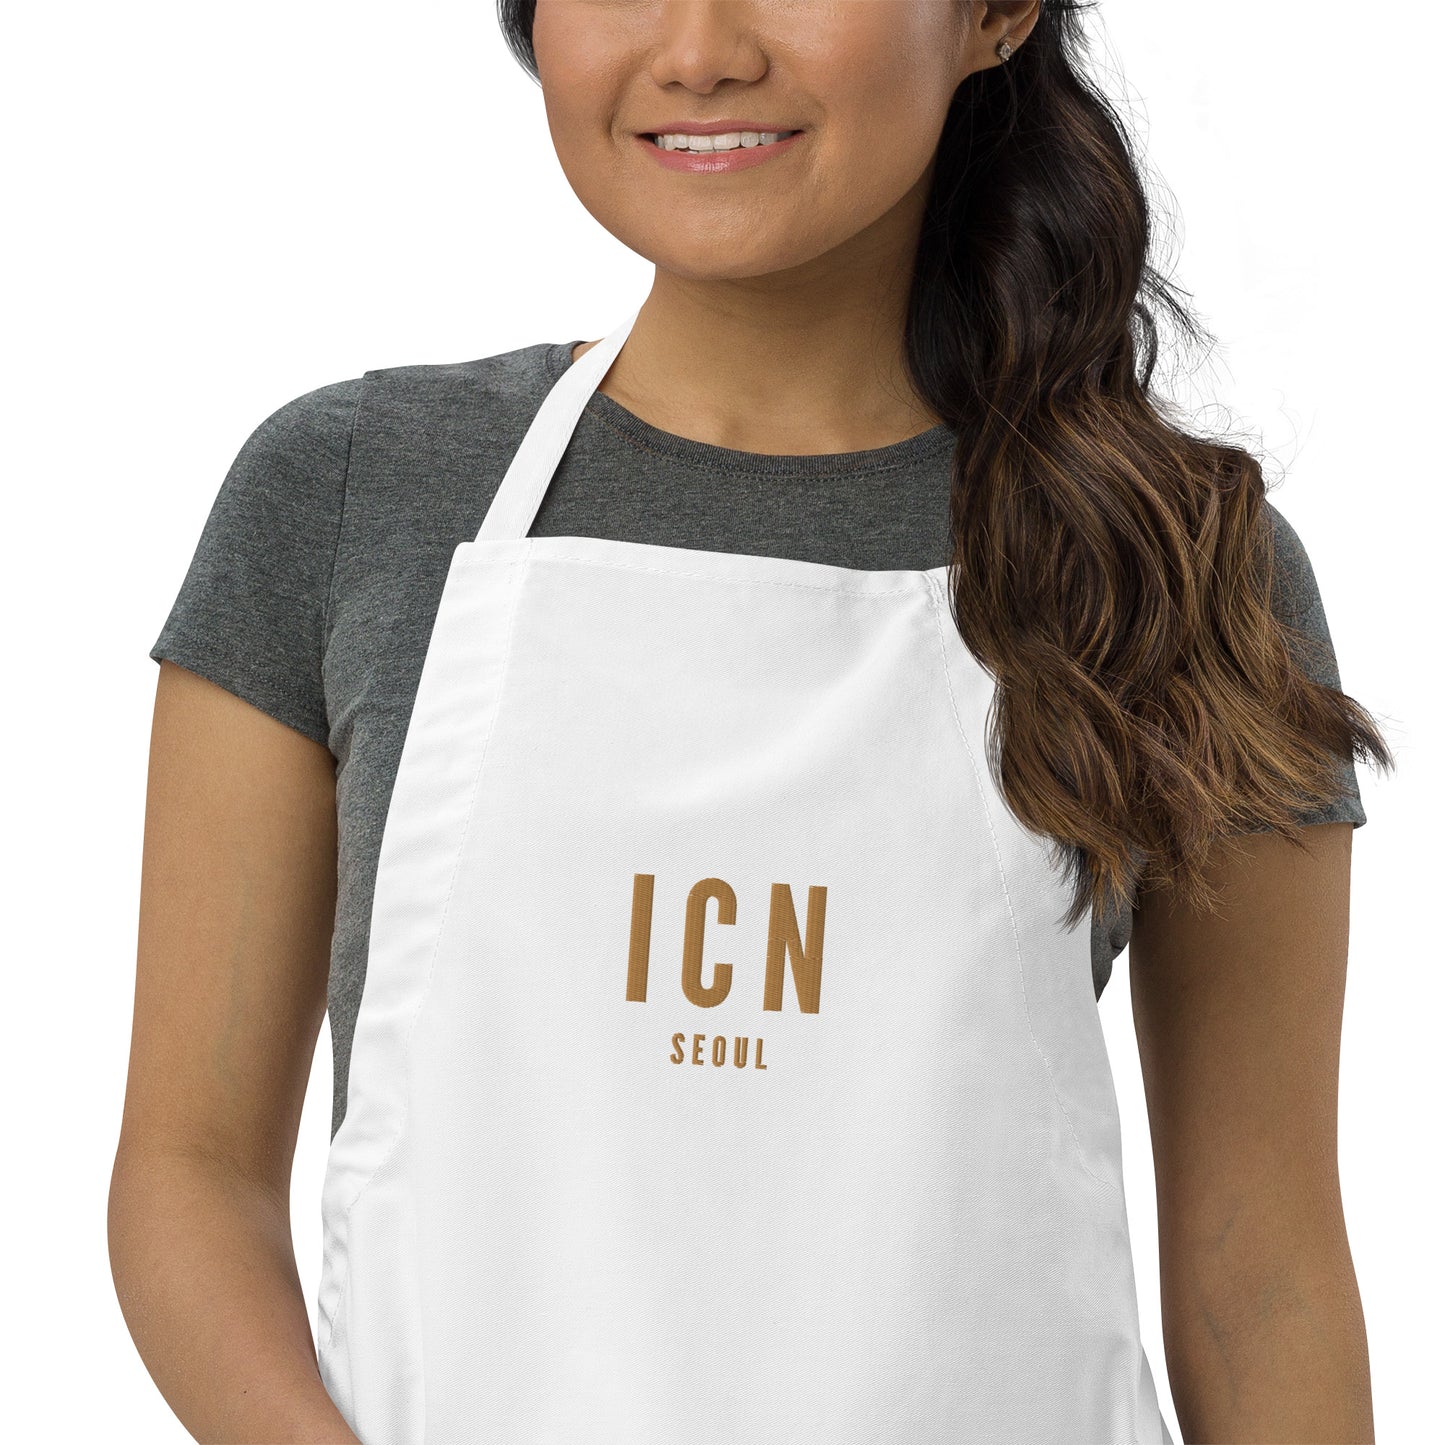 City Embroidered Apron - Old Gold • ICN Seoul • YHM Designs - Image 08